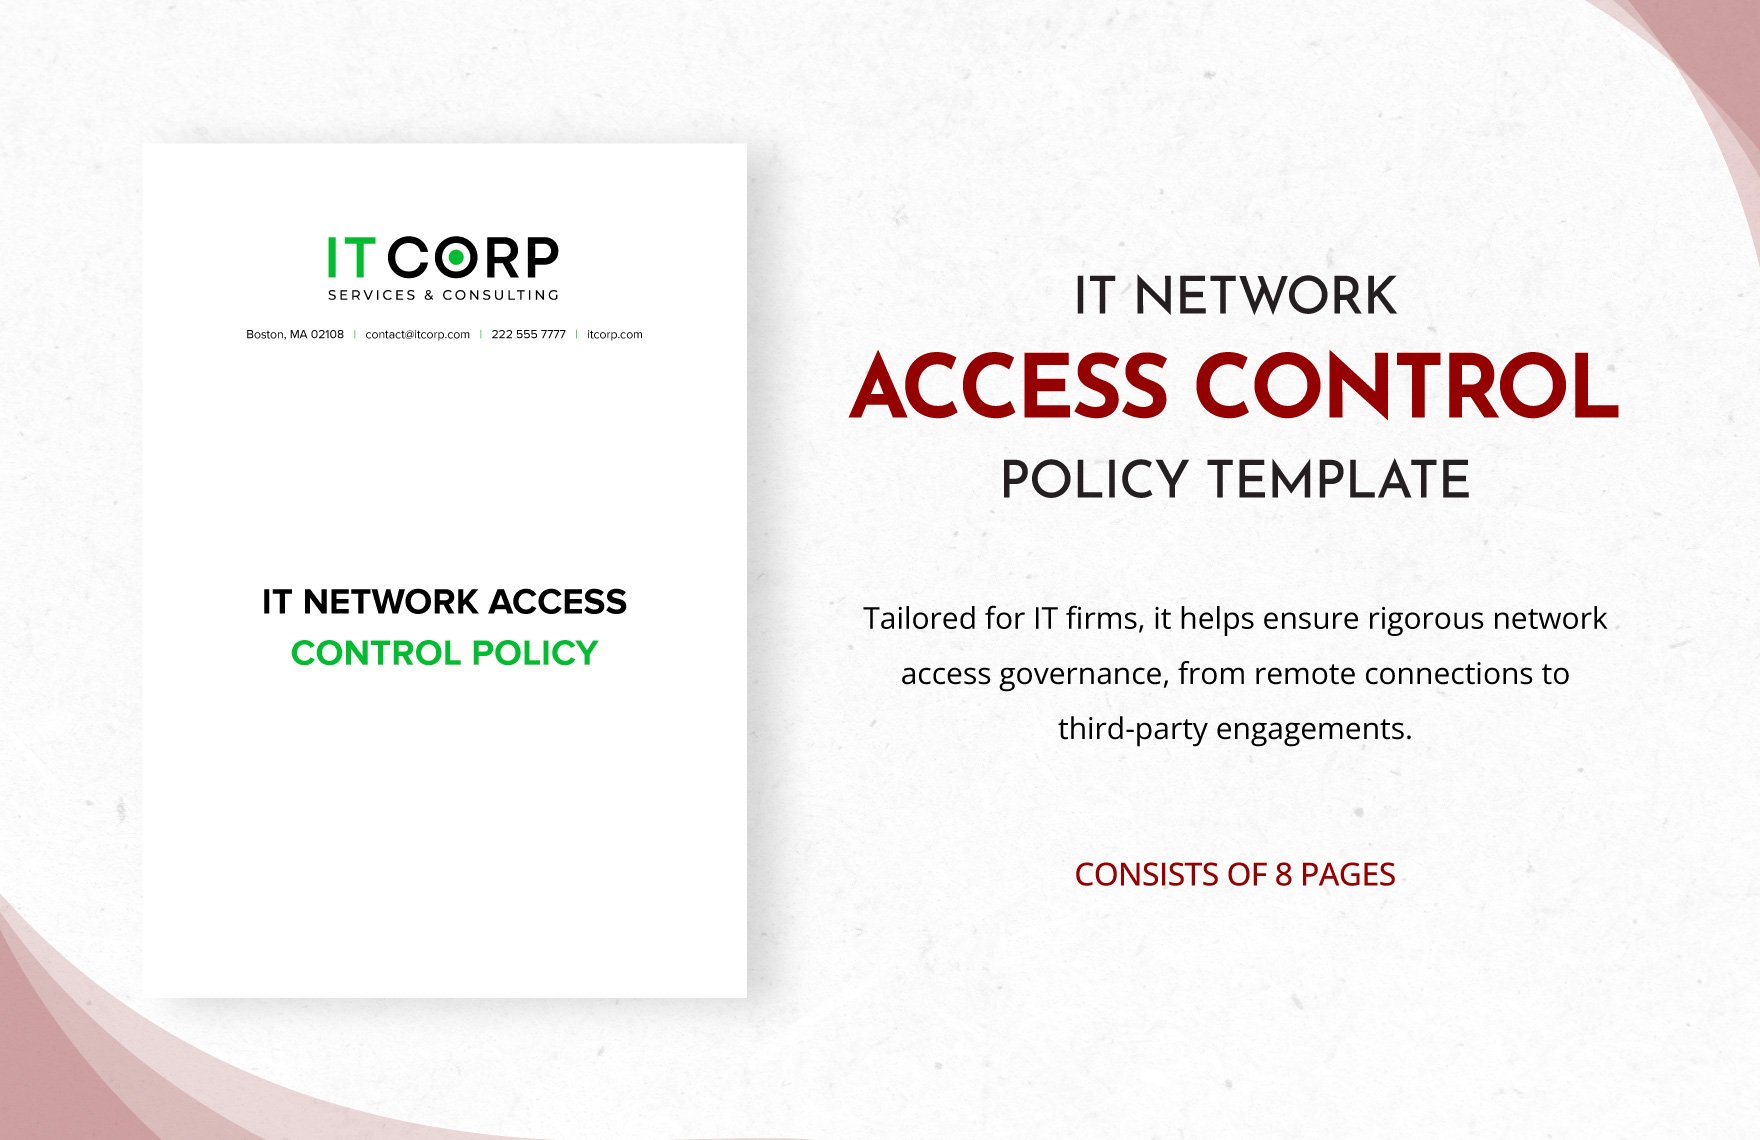 IT Network Access Control Policy Template